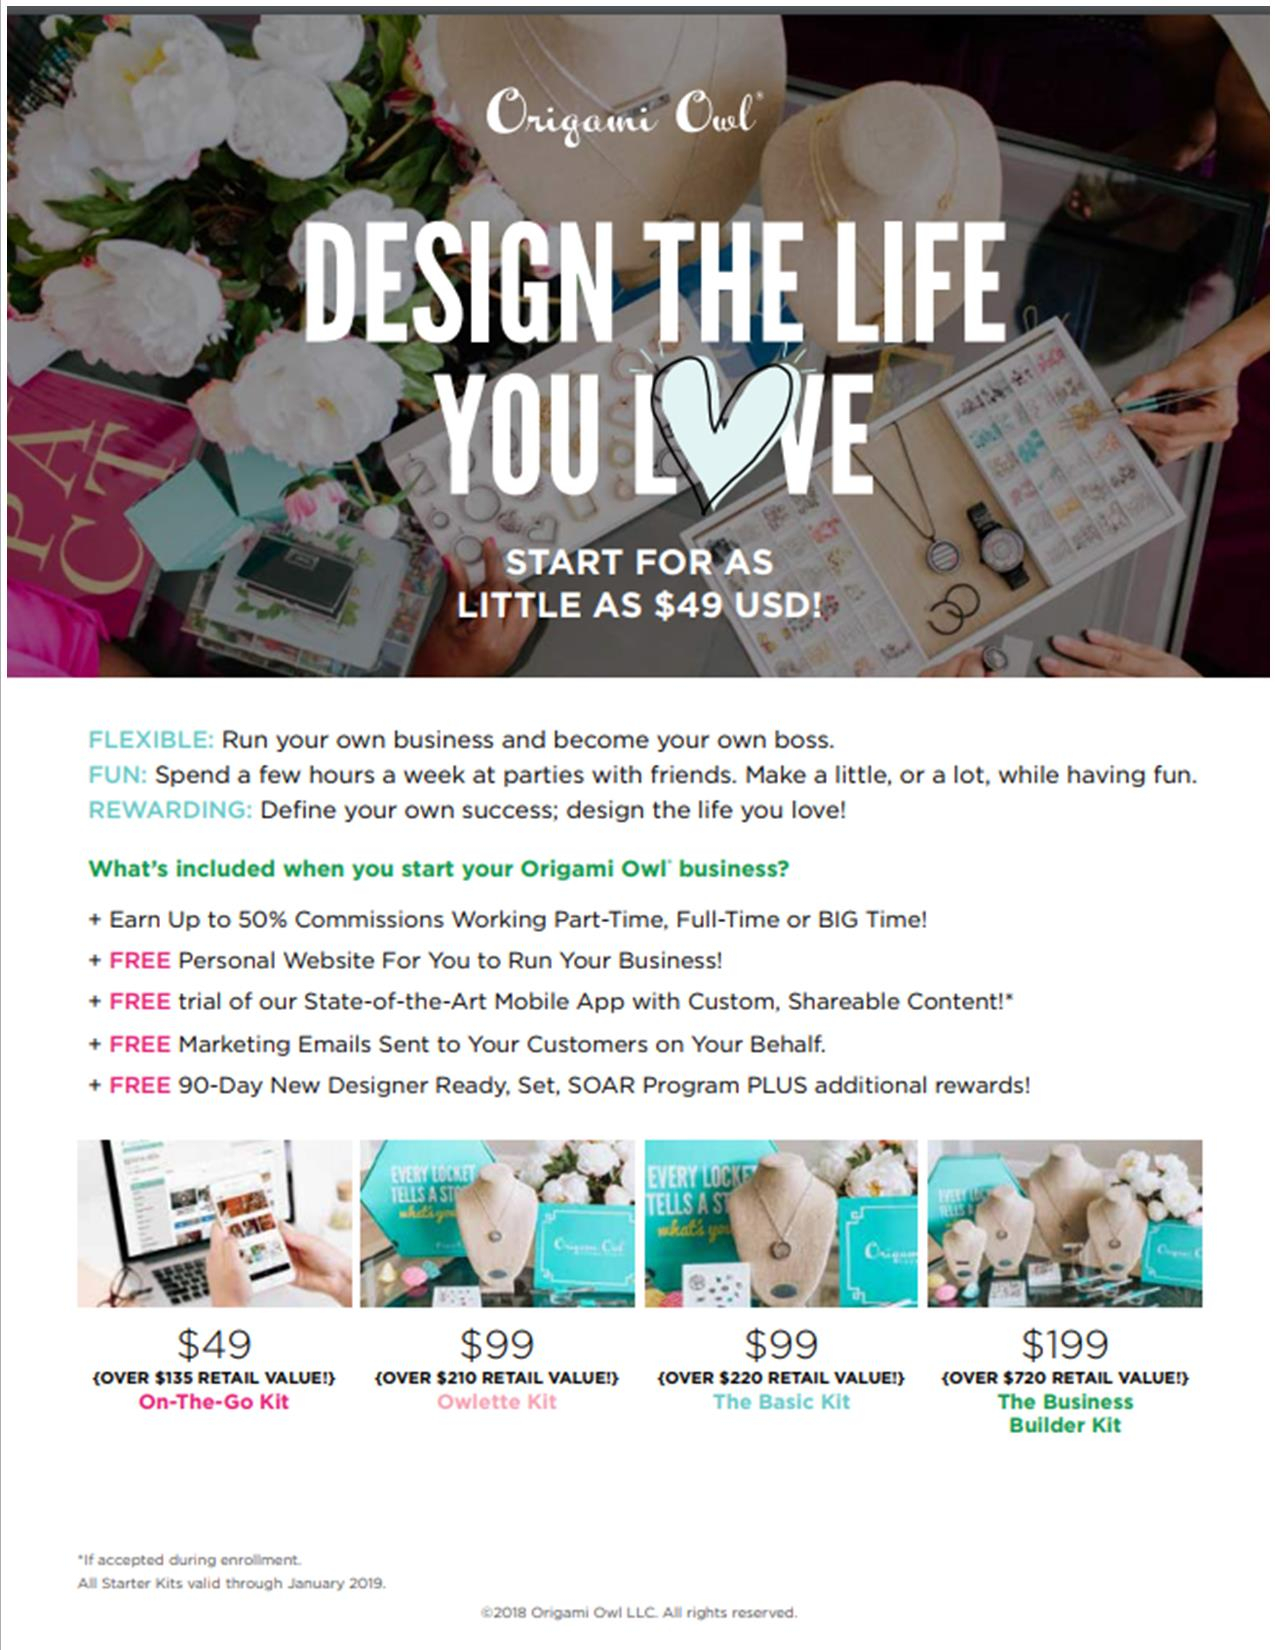 Origami Owl Brochure Join Origami Owl For Only 49 And Design Your Own Kit